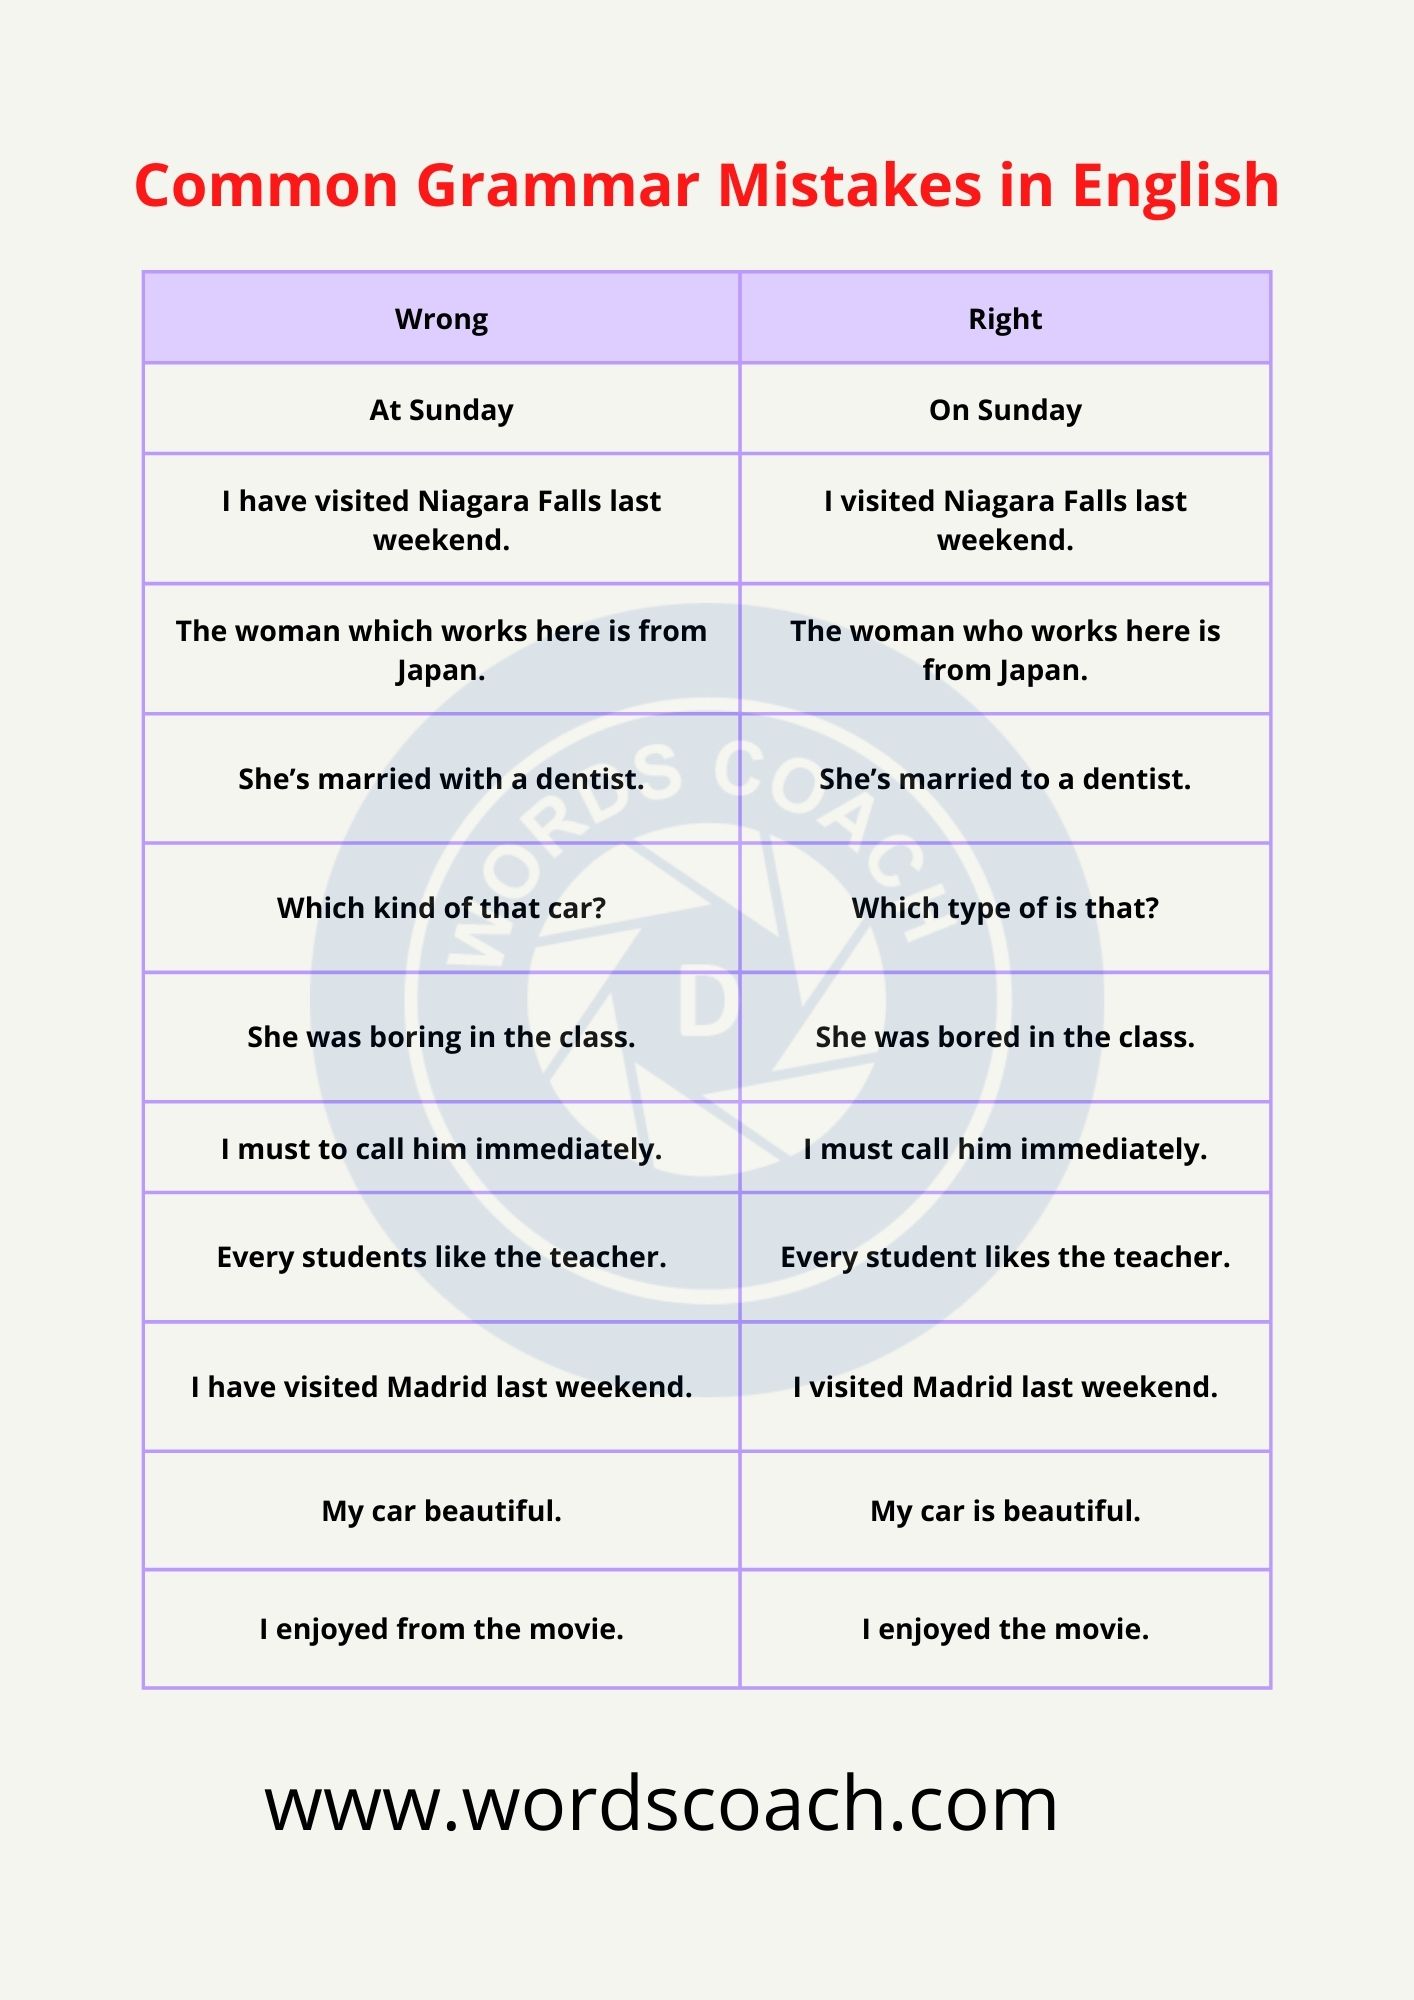 50+ Common Grammar Mistakes in English